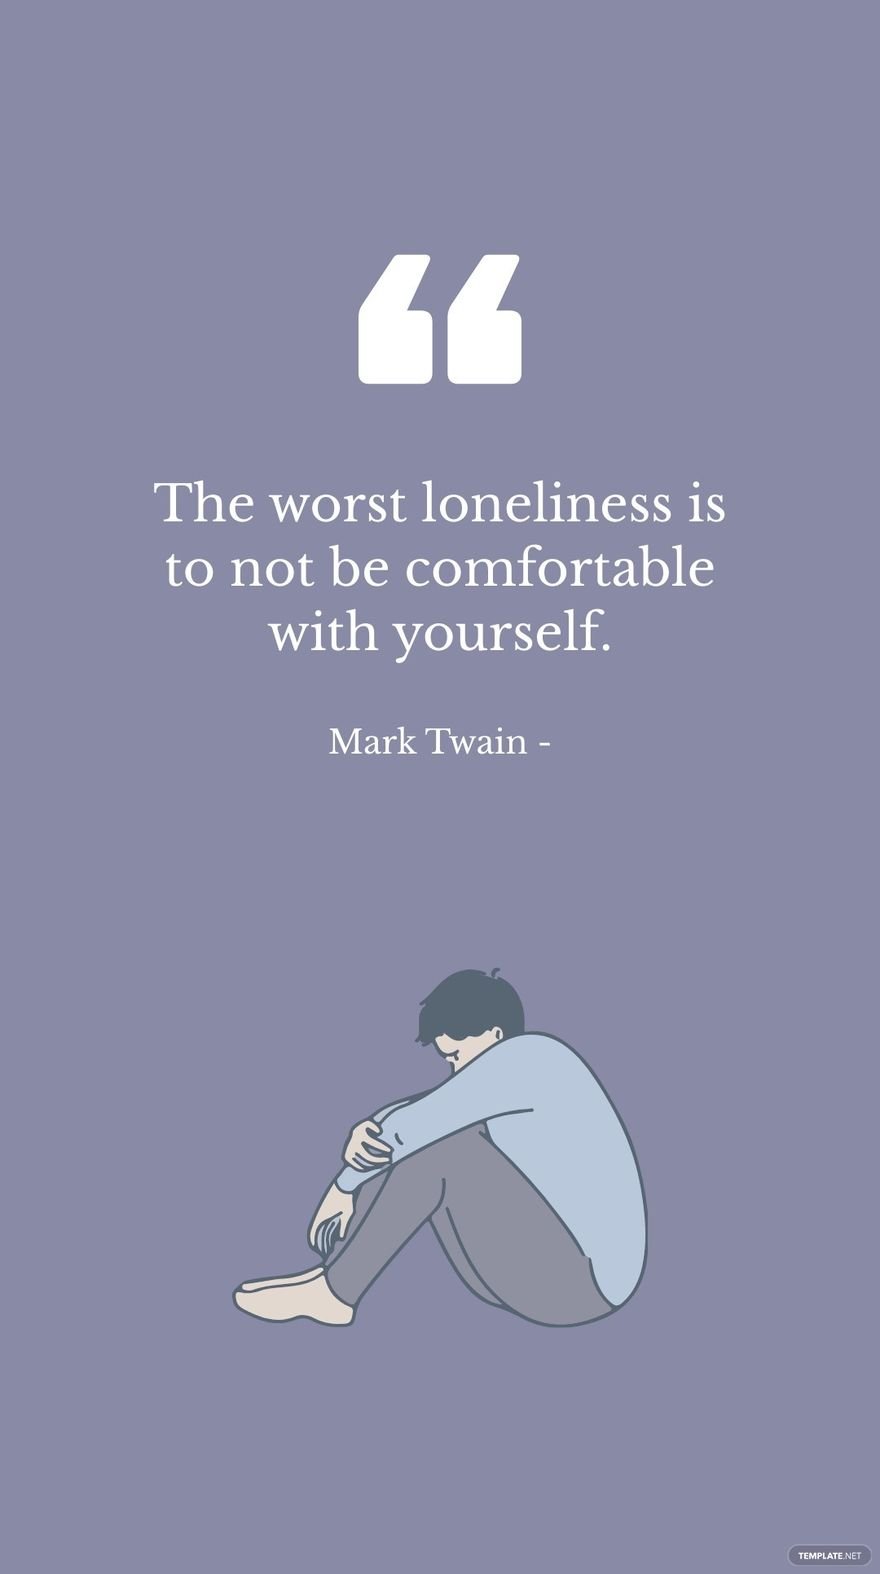 Mark Twain - The worst loneliness is to not be comfortable with yourself.